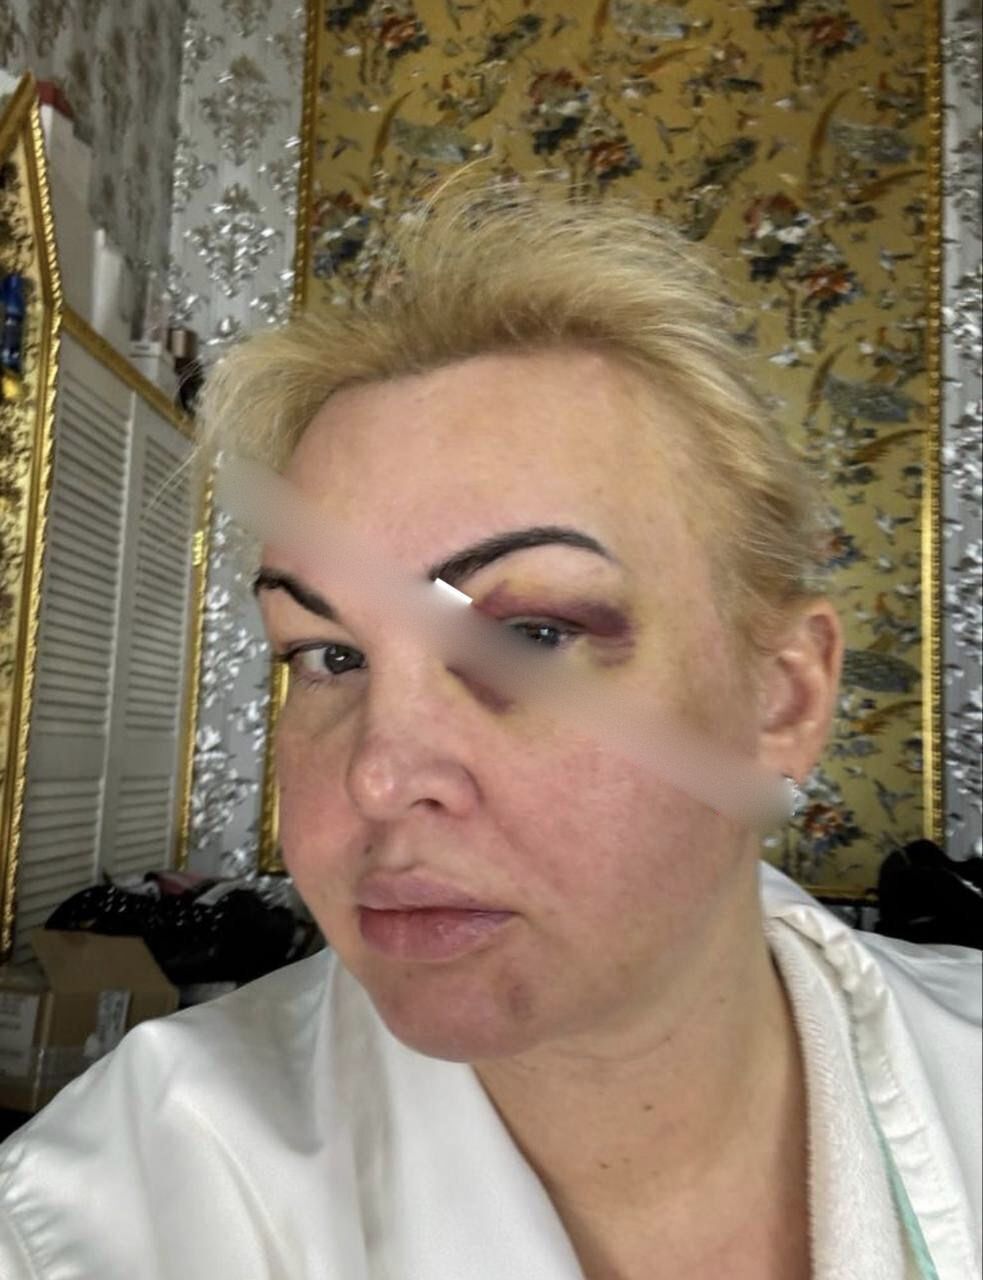 The network was shocked by photos of Kamalia in bruises and blood: the singer reacted